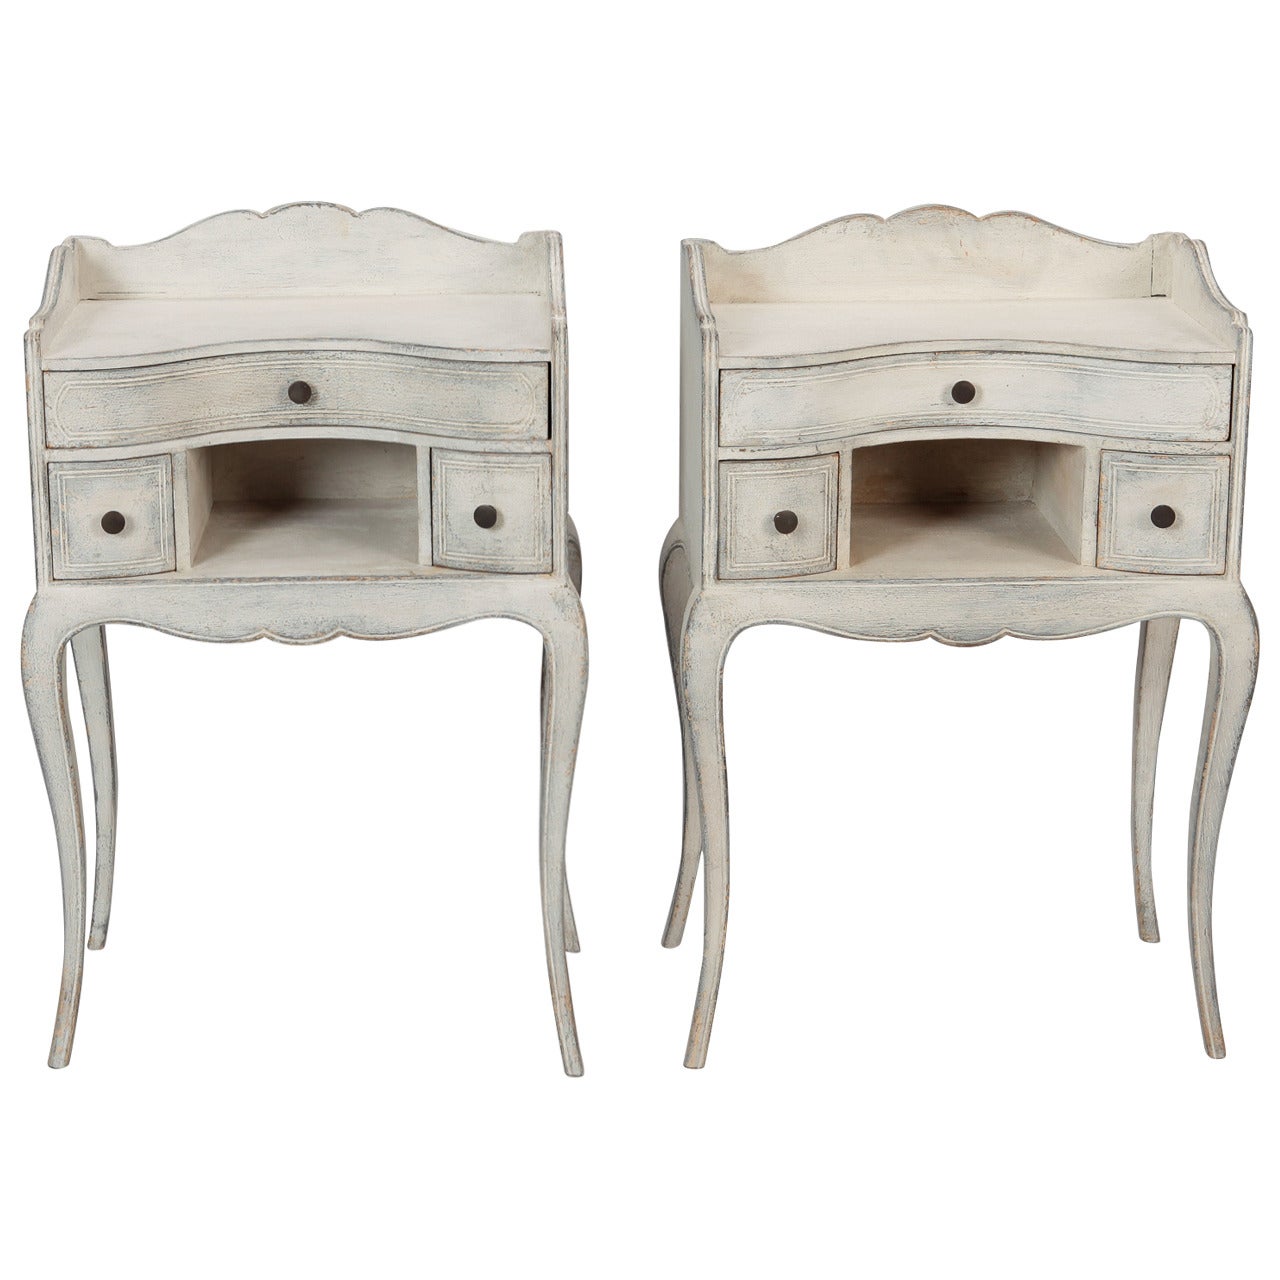 Pair of French Antique White Bedside Tables